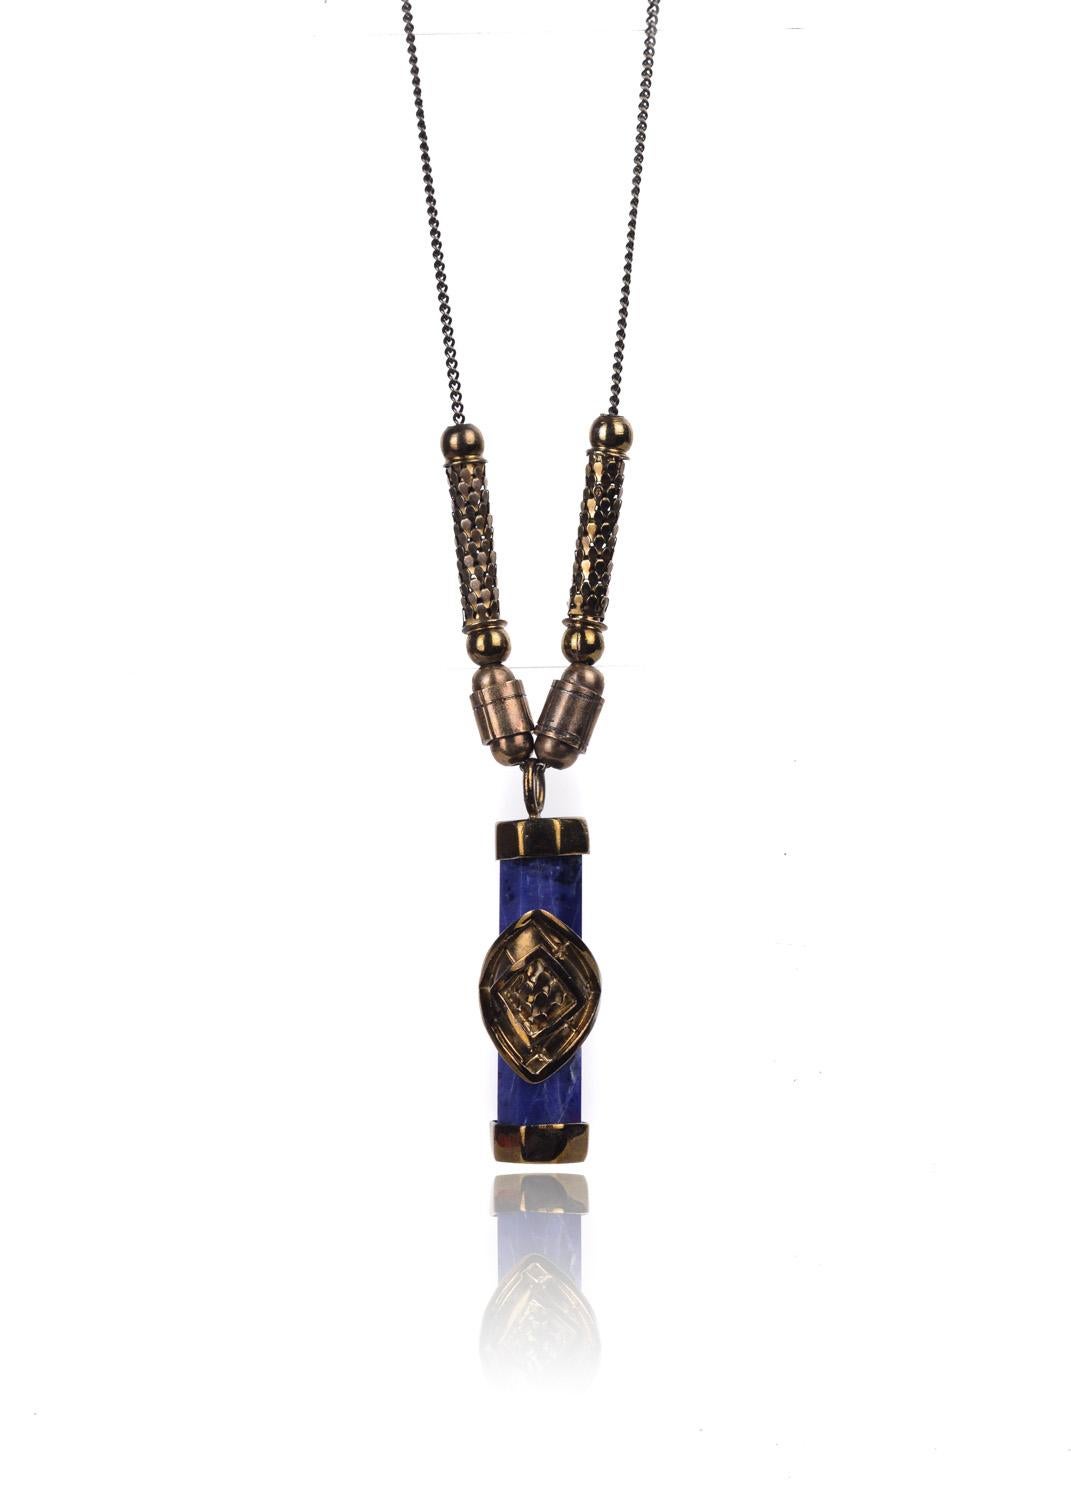 Add Artistic depth to you ensemble with Roberto Cavalli's Blue Marble Prism Necklace. This geometric piece features a brass octagon prism, centered beveled brass applique, and flexible scaled brass chain sliders. You can slip this necklace on with a